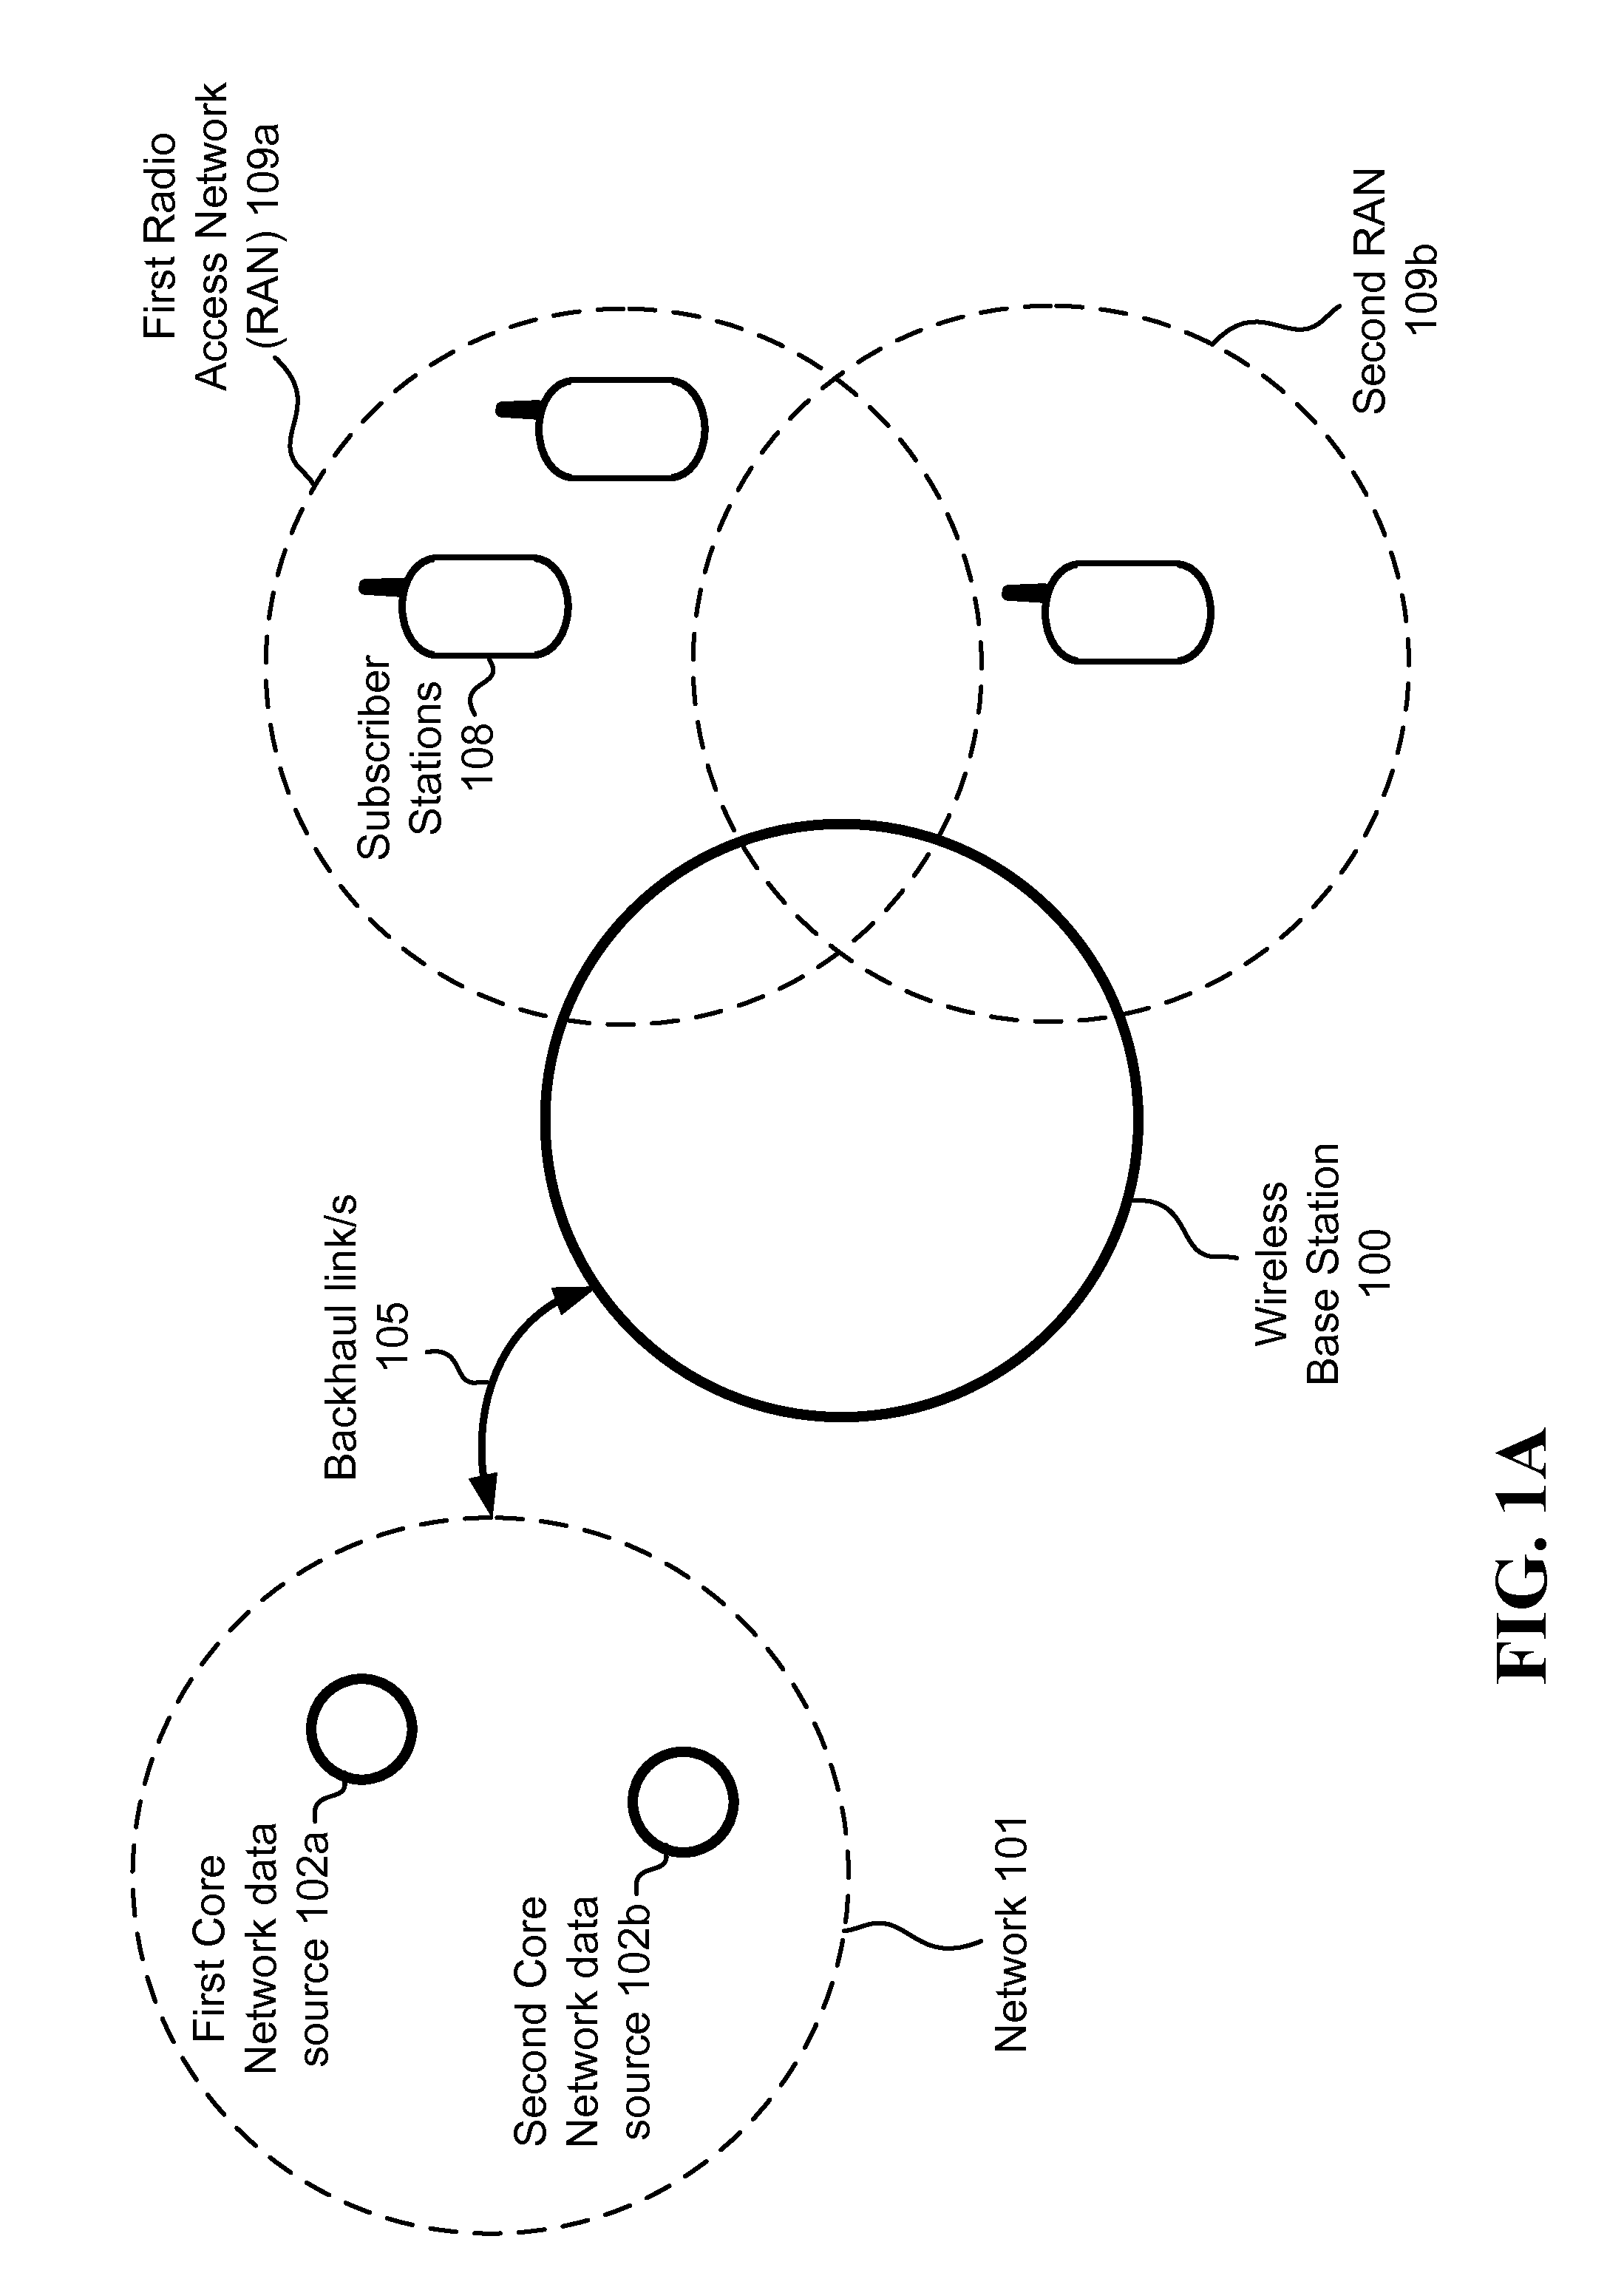 Multi-band wireless cellular system and method